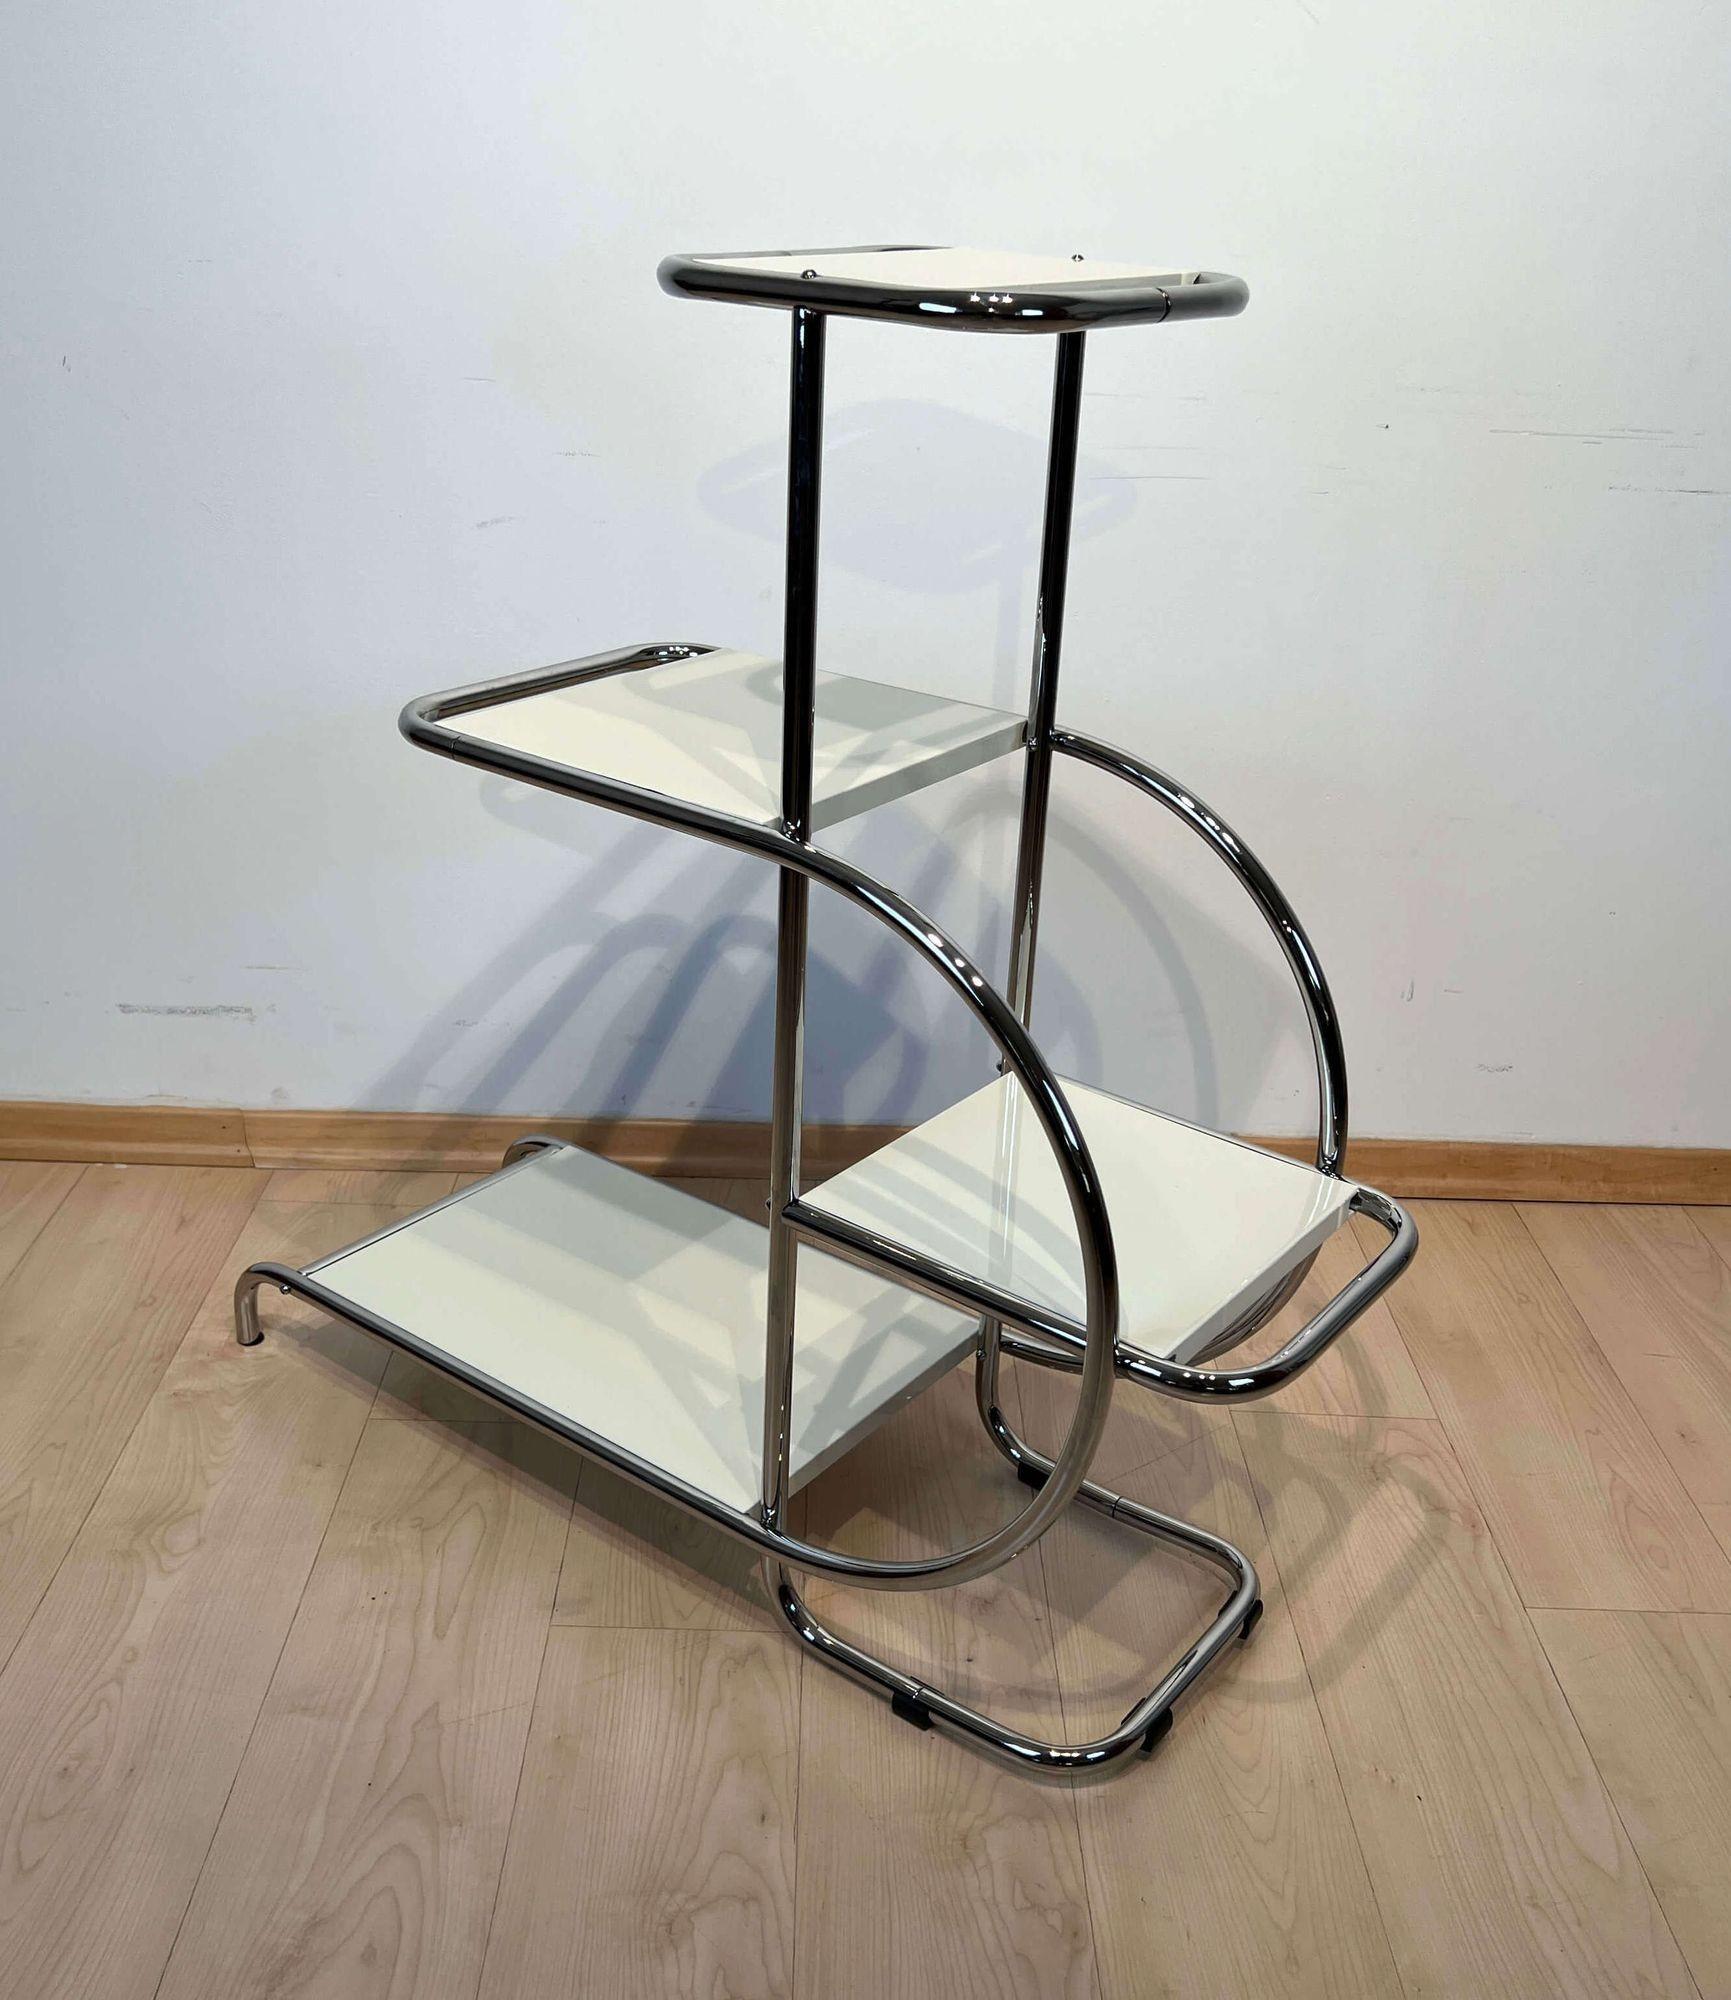 Bauhaus Steeltube Etagere, Creme-White Lacquer, Nickel Plate, Germany, 1930s For Sale 3